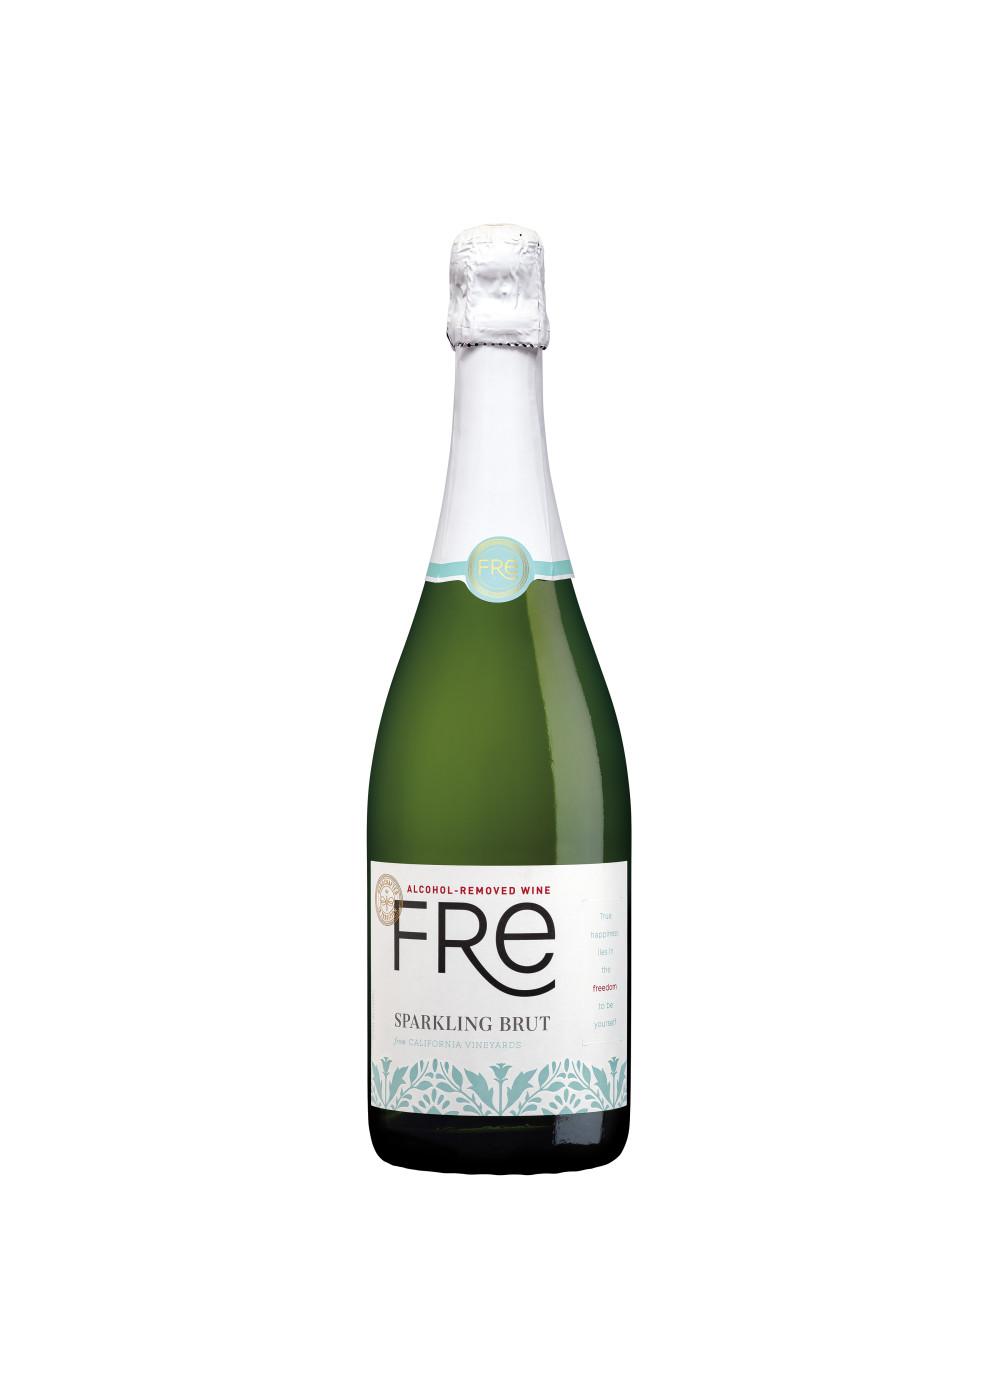 Sutter Home Family Vineyards Fre Alcohol Removed Sparkling Brut; image 1 of 5